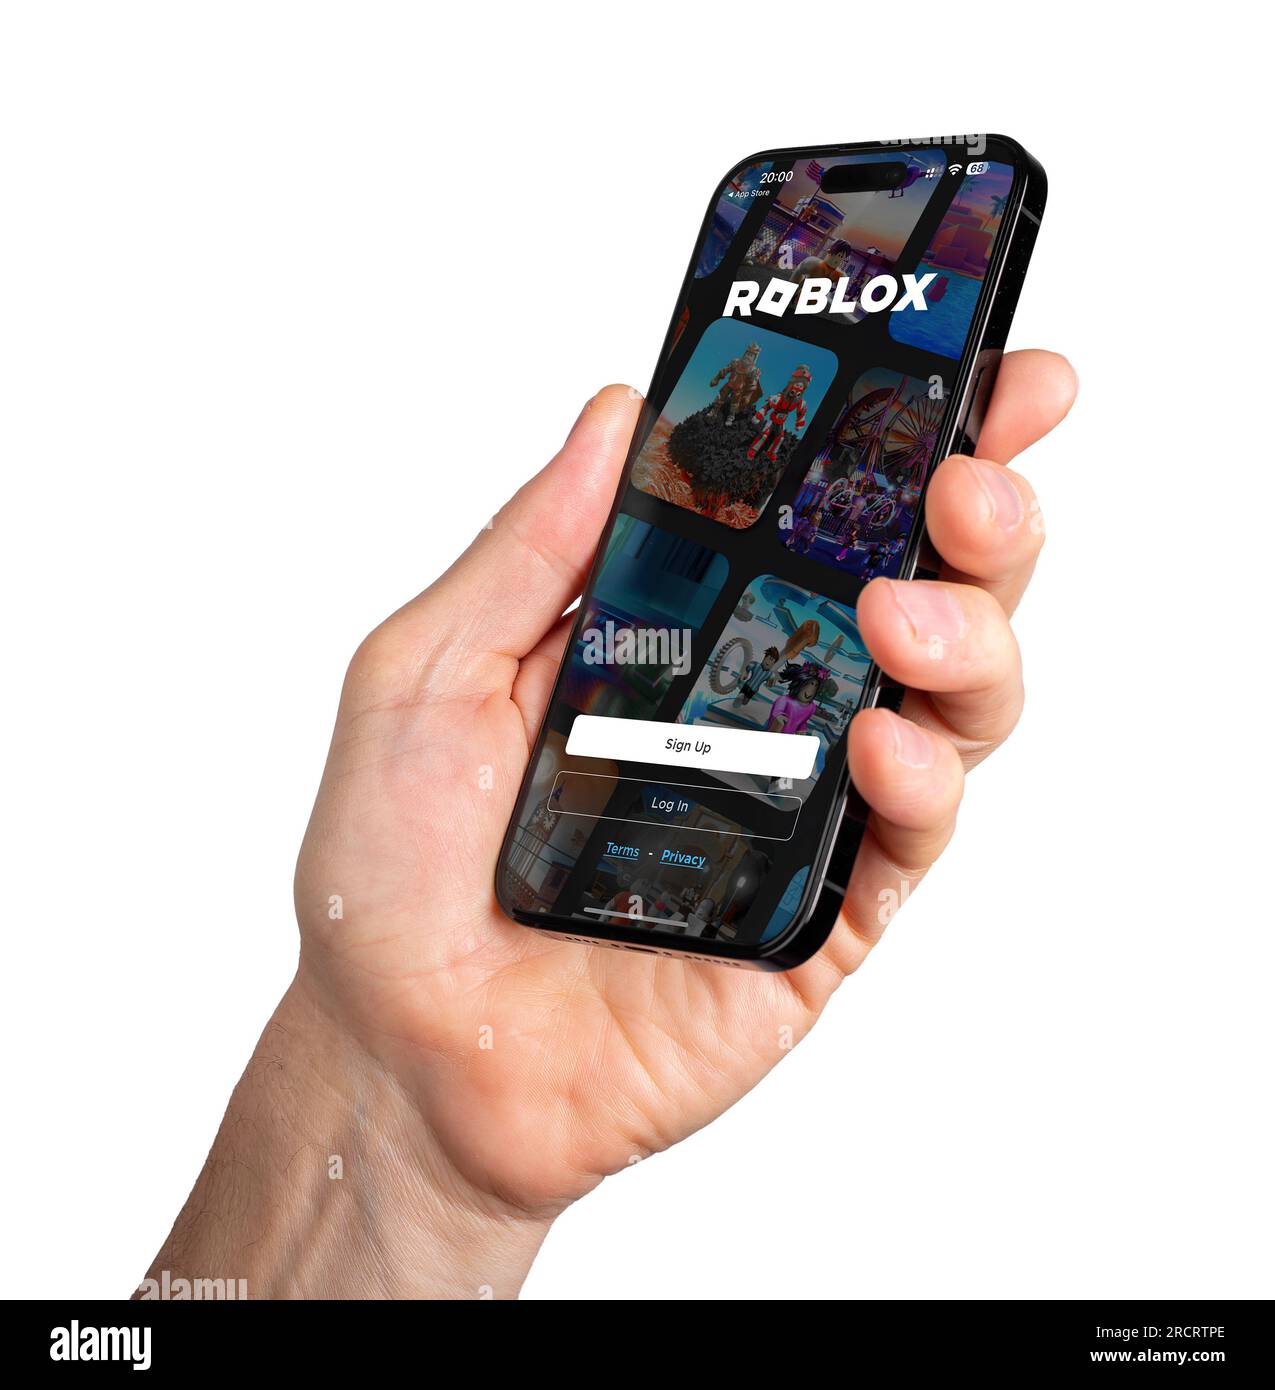 roblox mobile app icon - Google Search  Old app logos, Minecraft video  games, Roblox